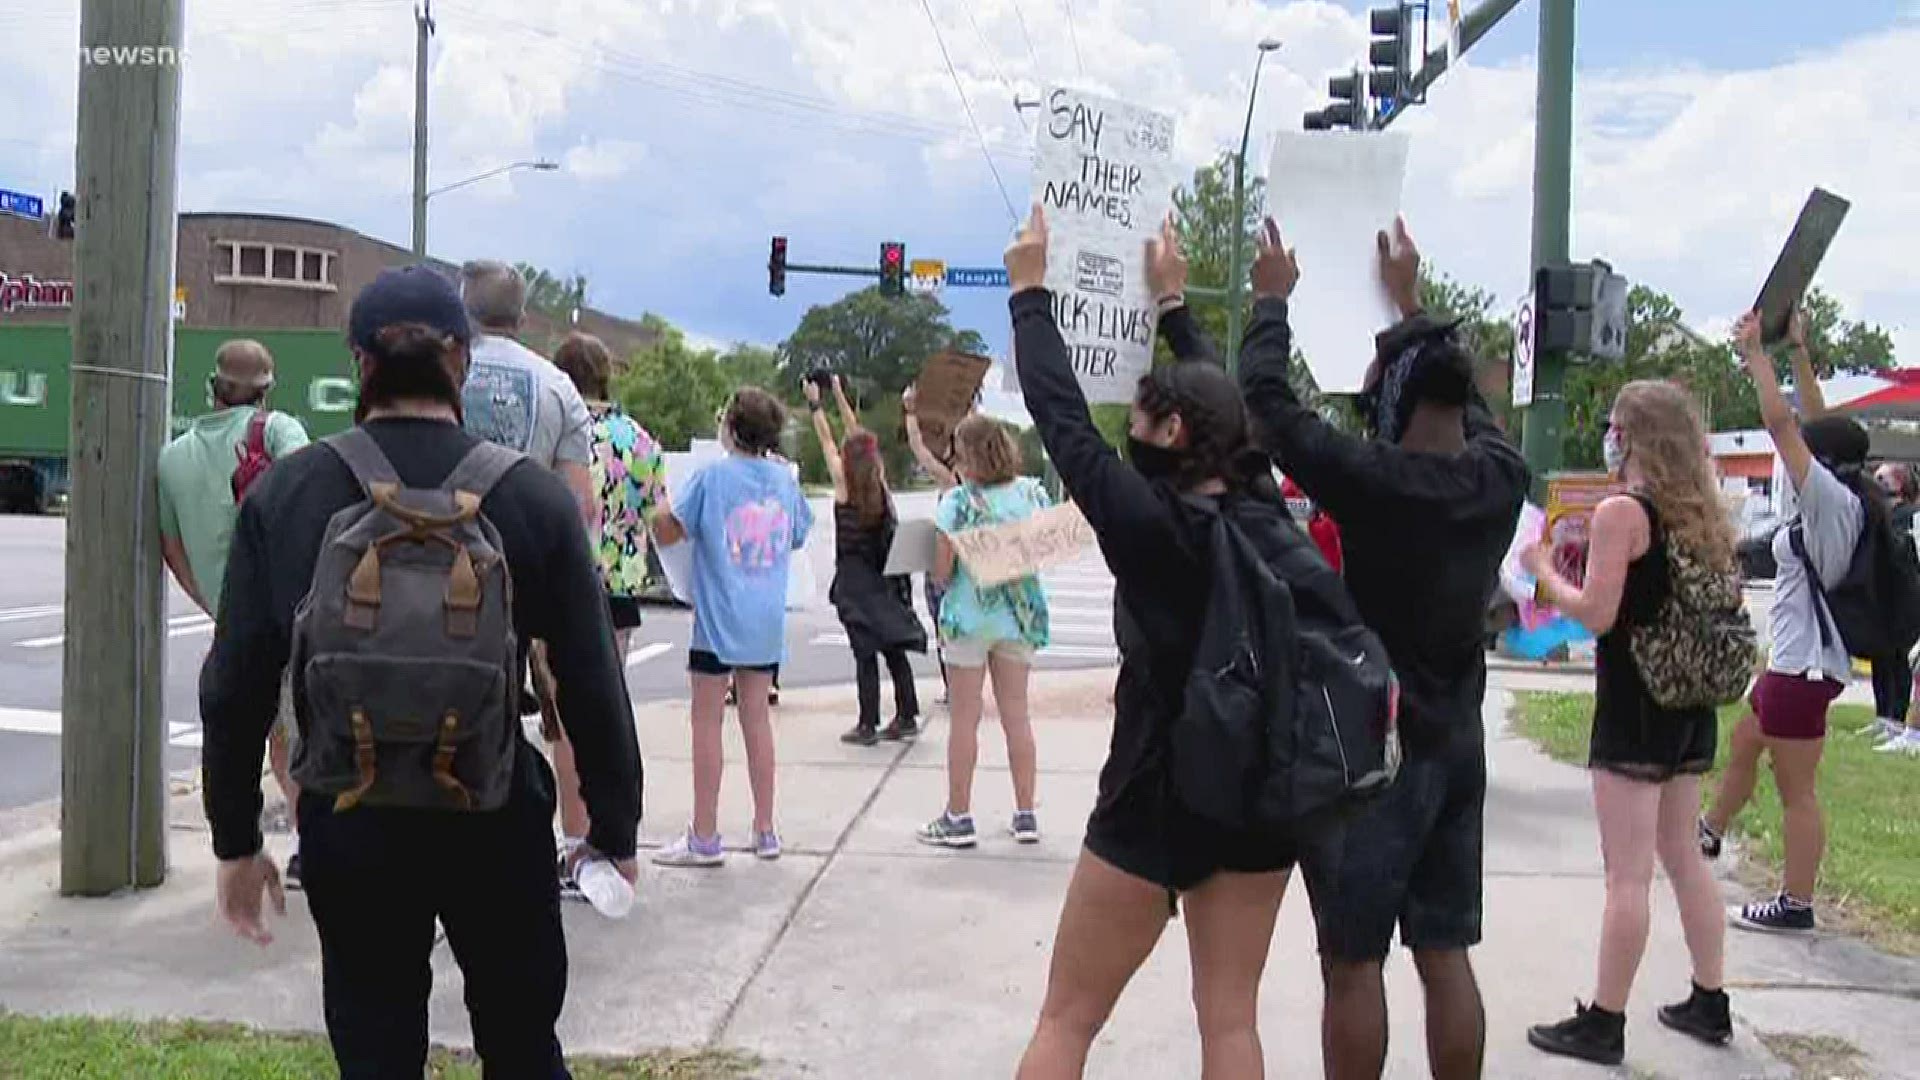 Dozens marched in Downtown Norfolk as part of a new series called "Freedom Friday."